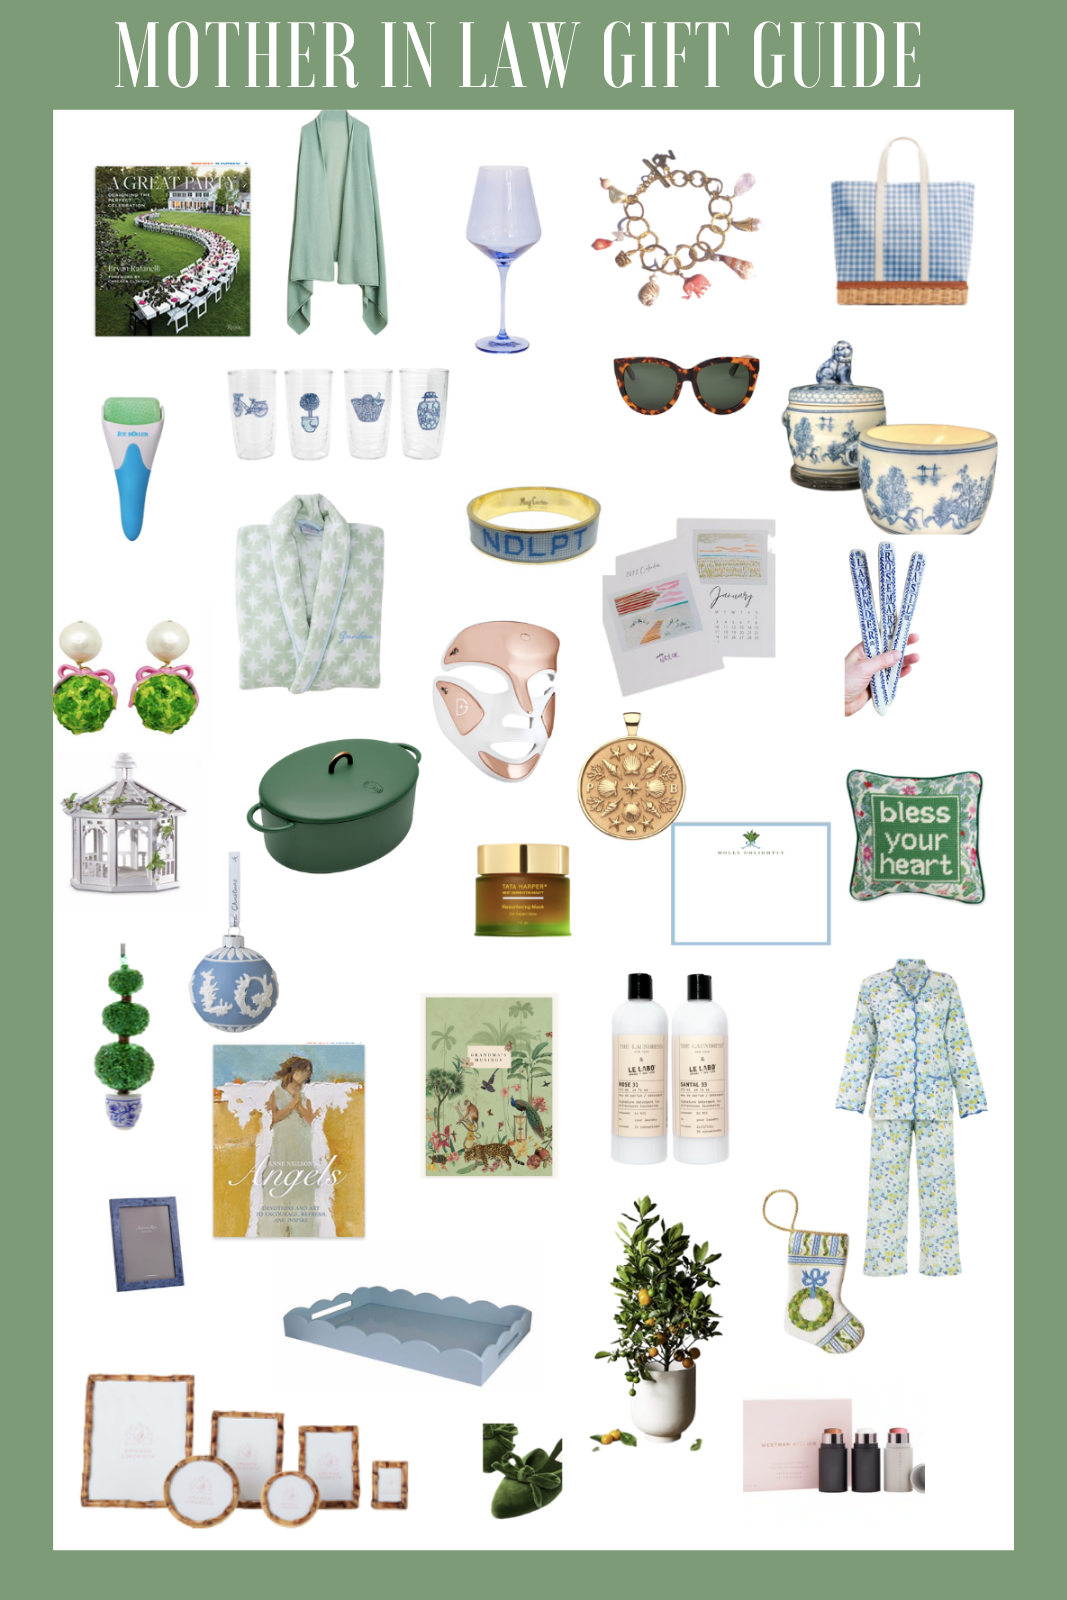 Mother In Law Gift Guide - Olive and Tate